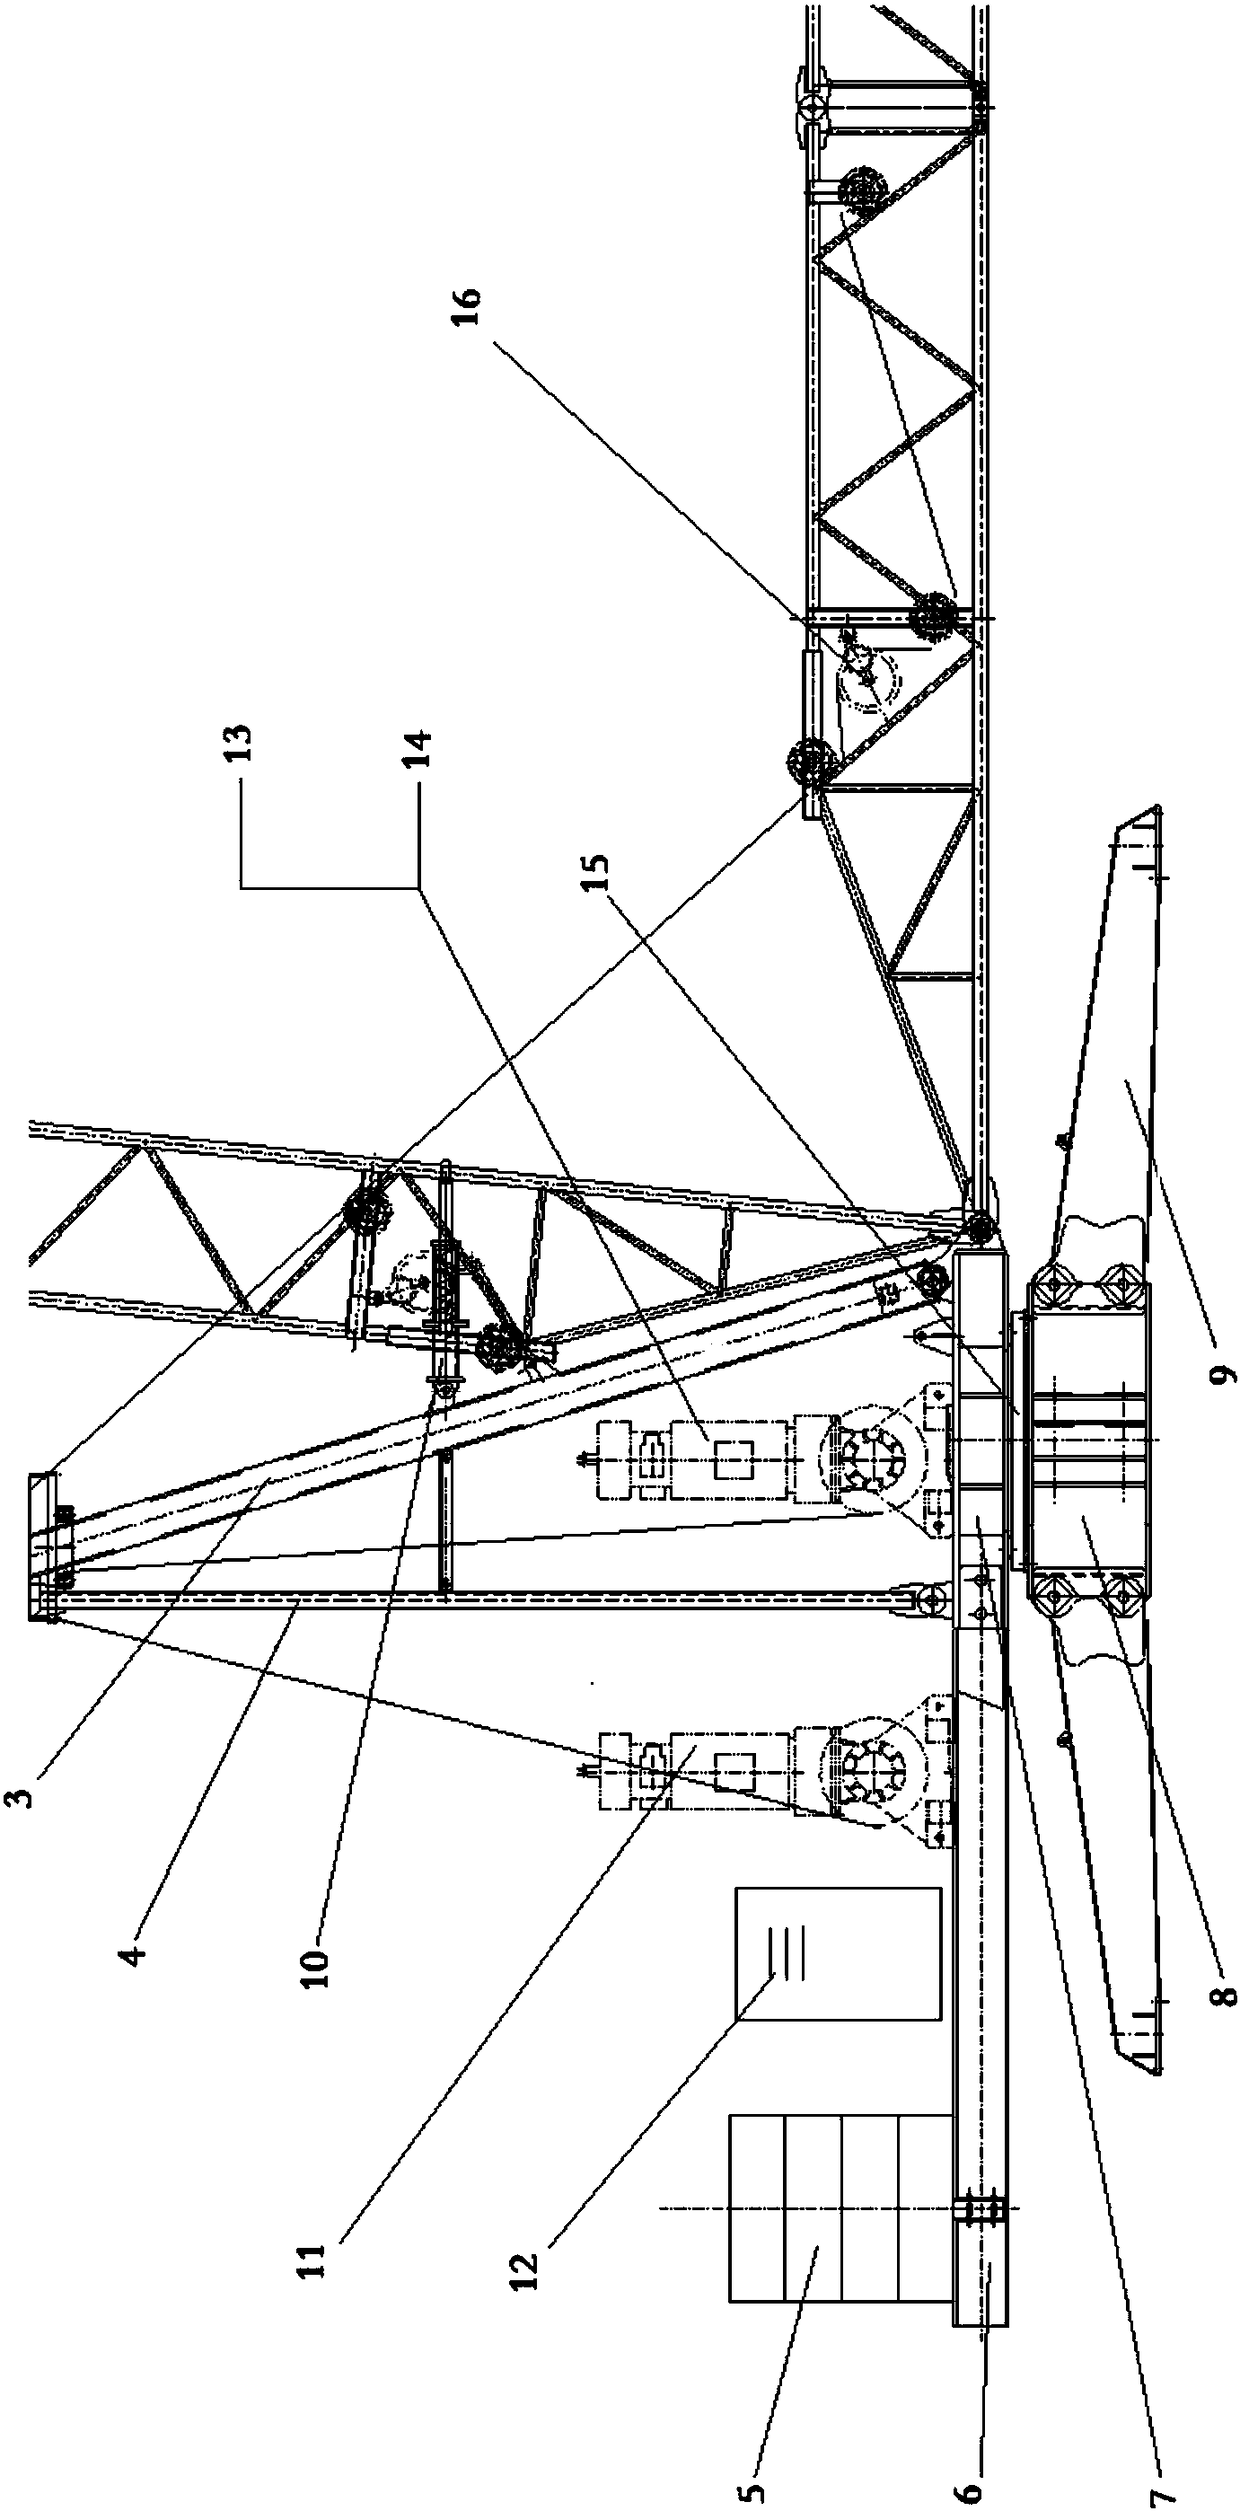 A roof lifting device